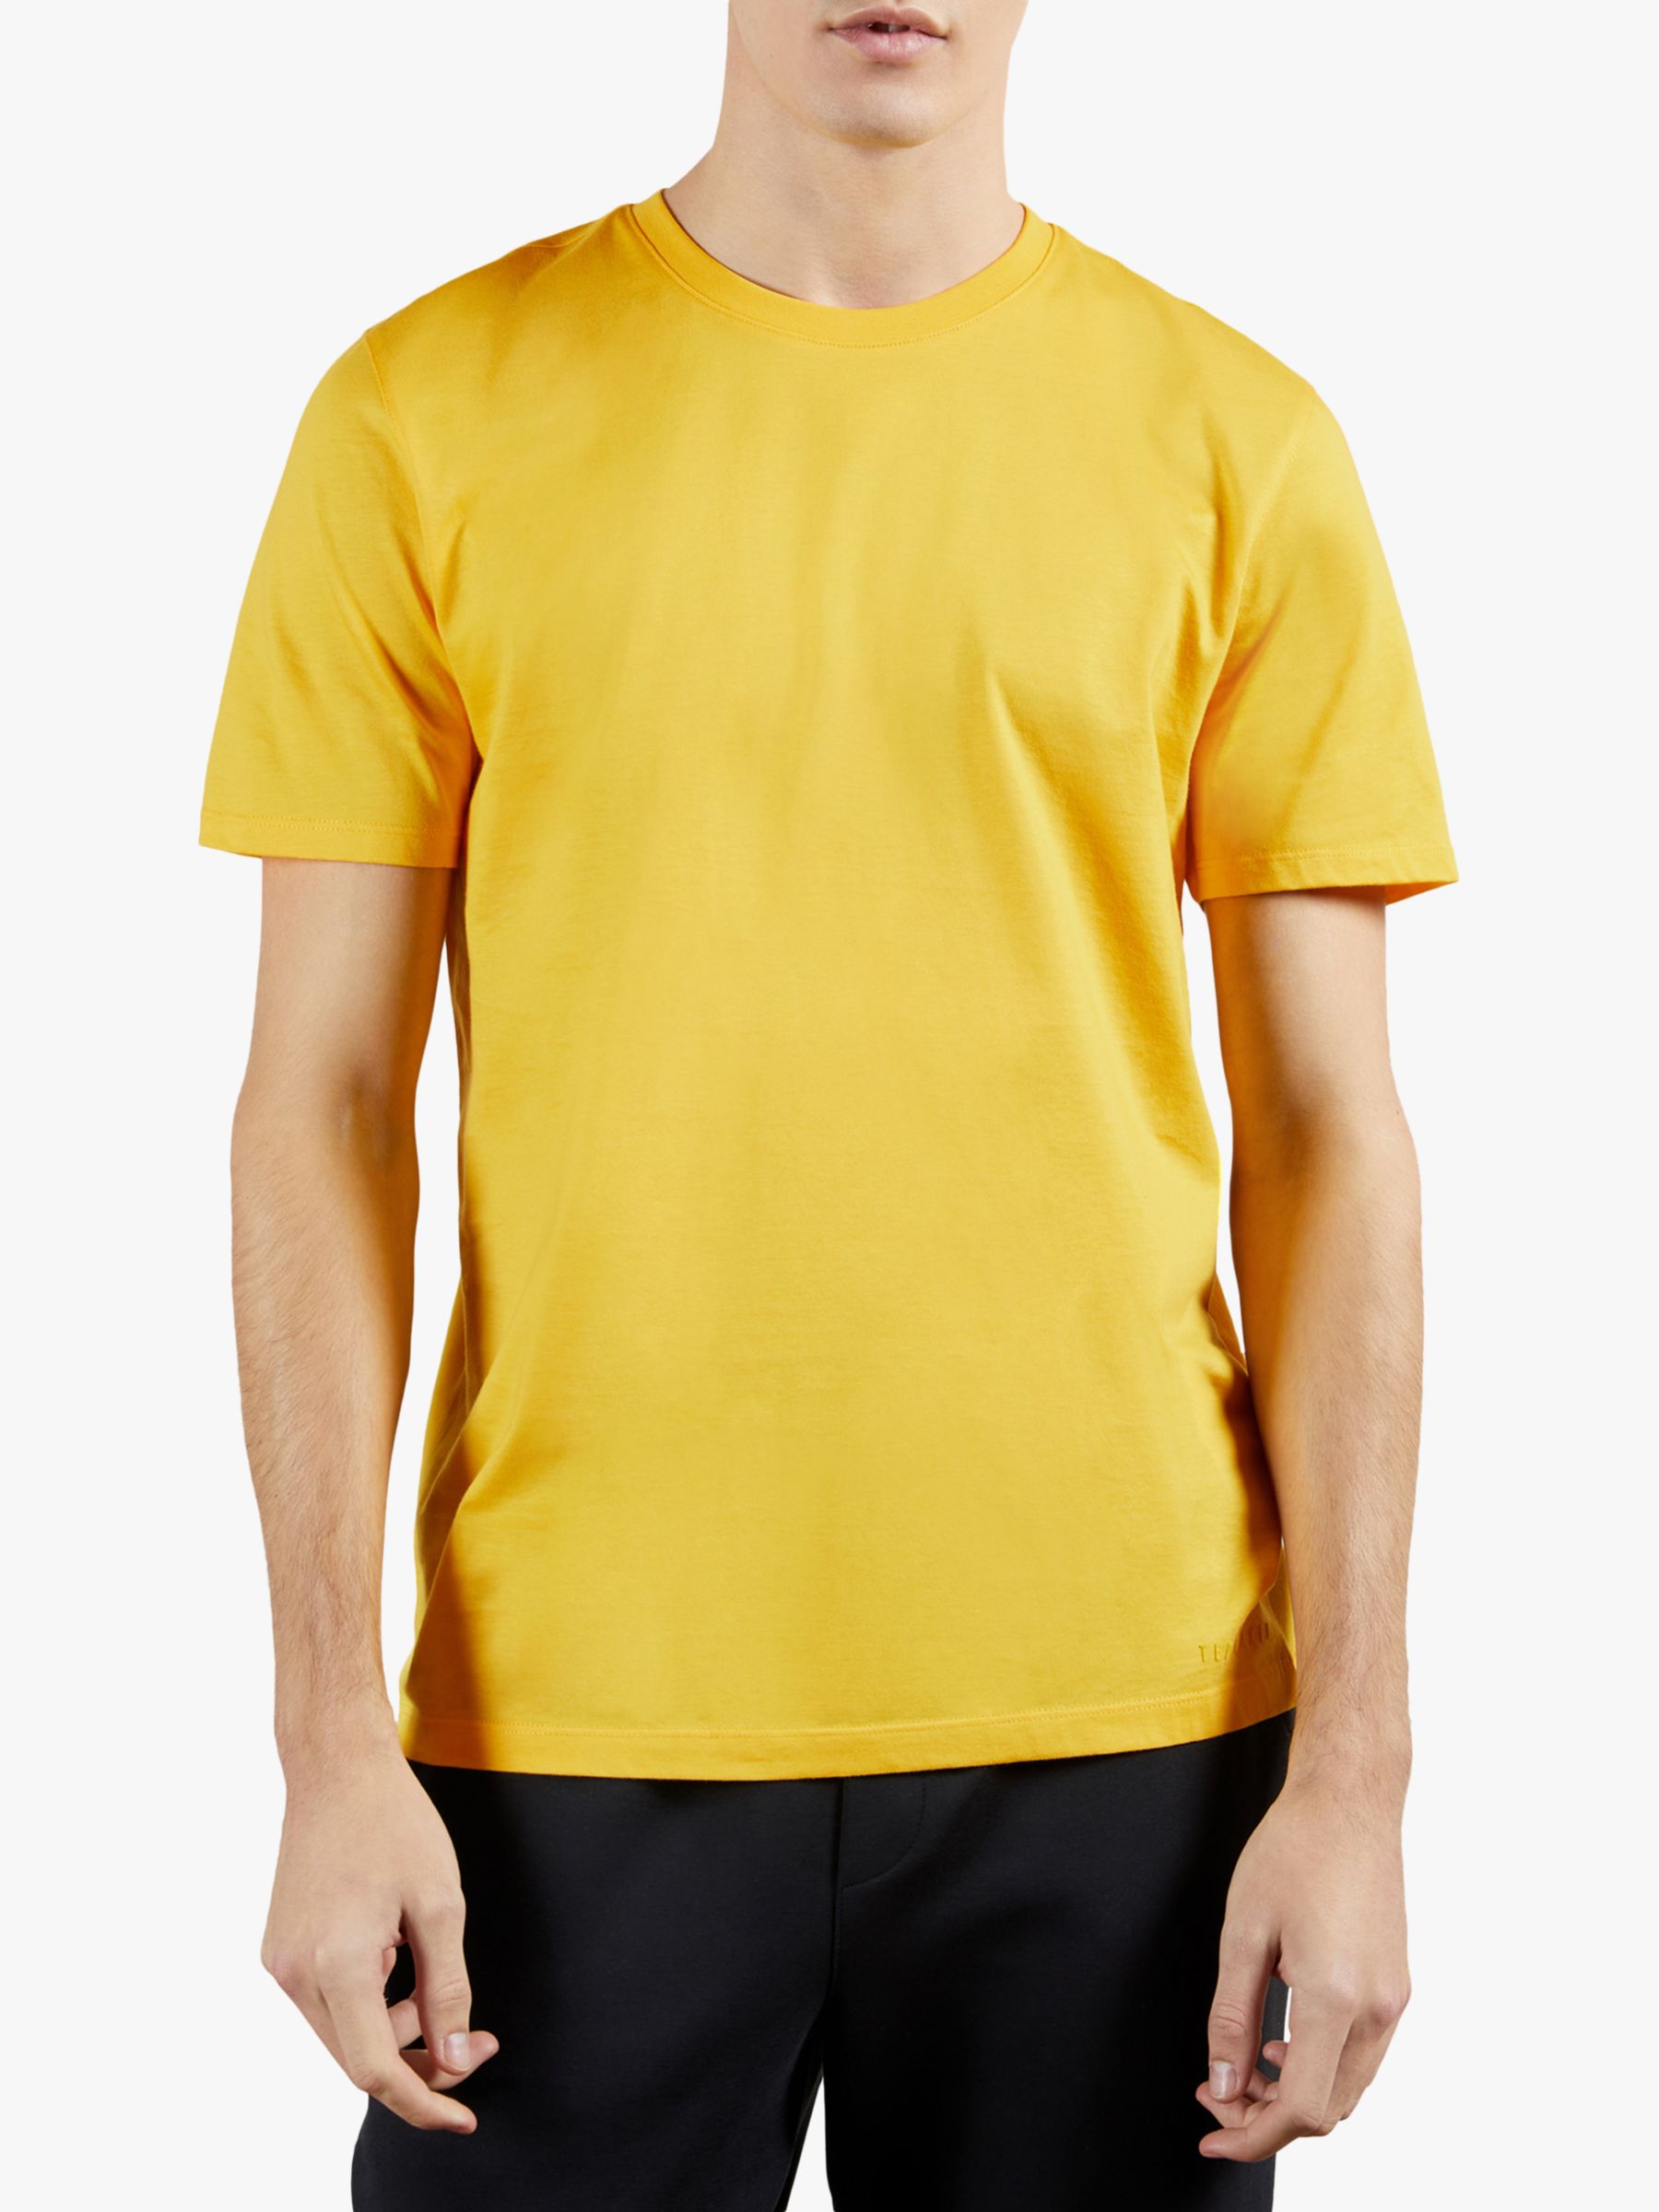 Ted Baker Only Cotton Crew Neck T-Shirt, Yellow at John Lewis & Partners